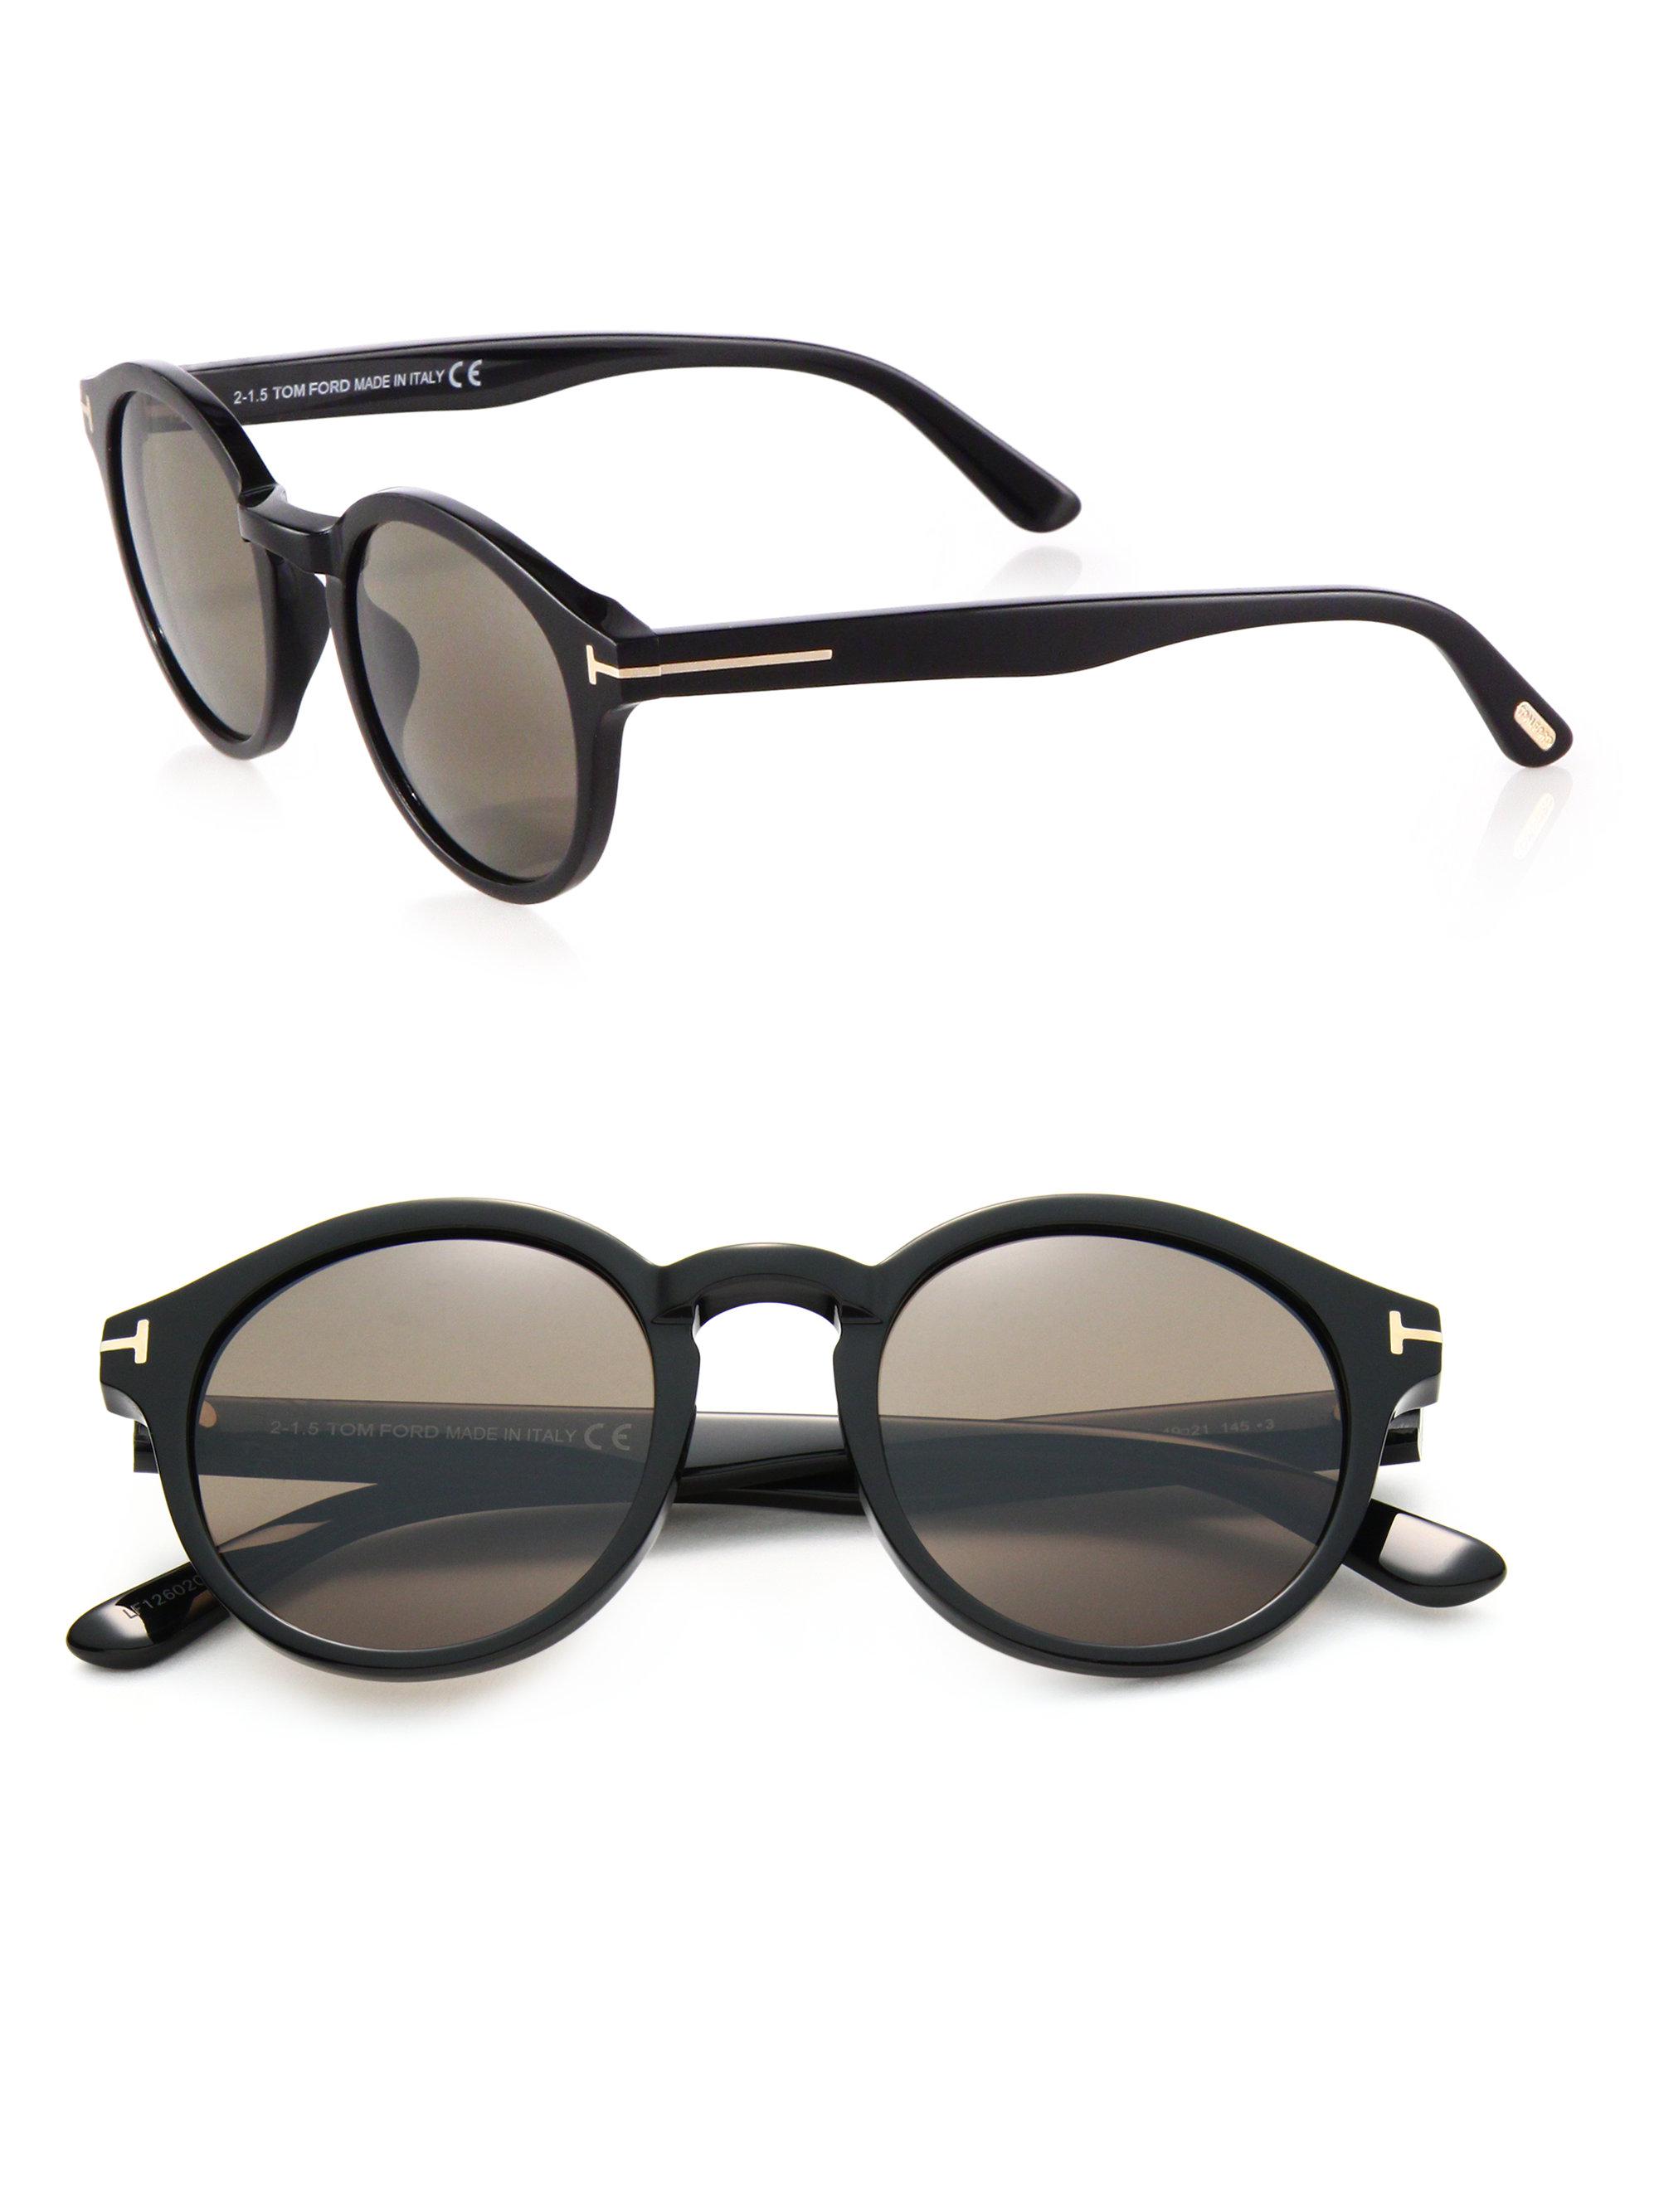 Lyst Tom Ford Lucho Round 49mm Sunglasses In Black For Men 